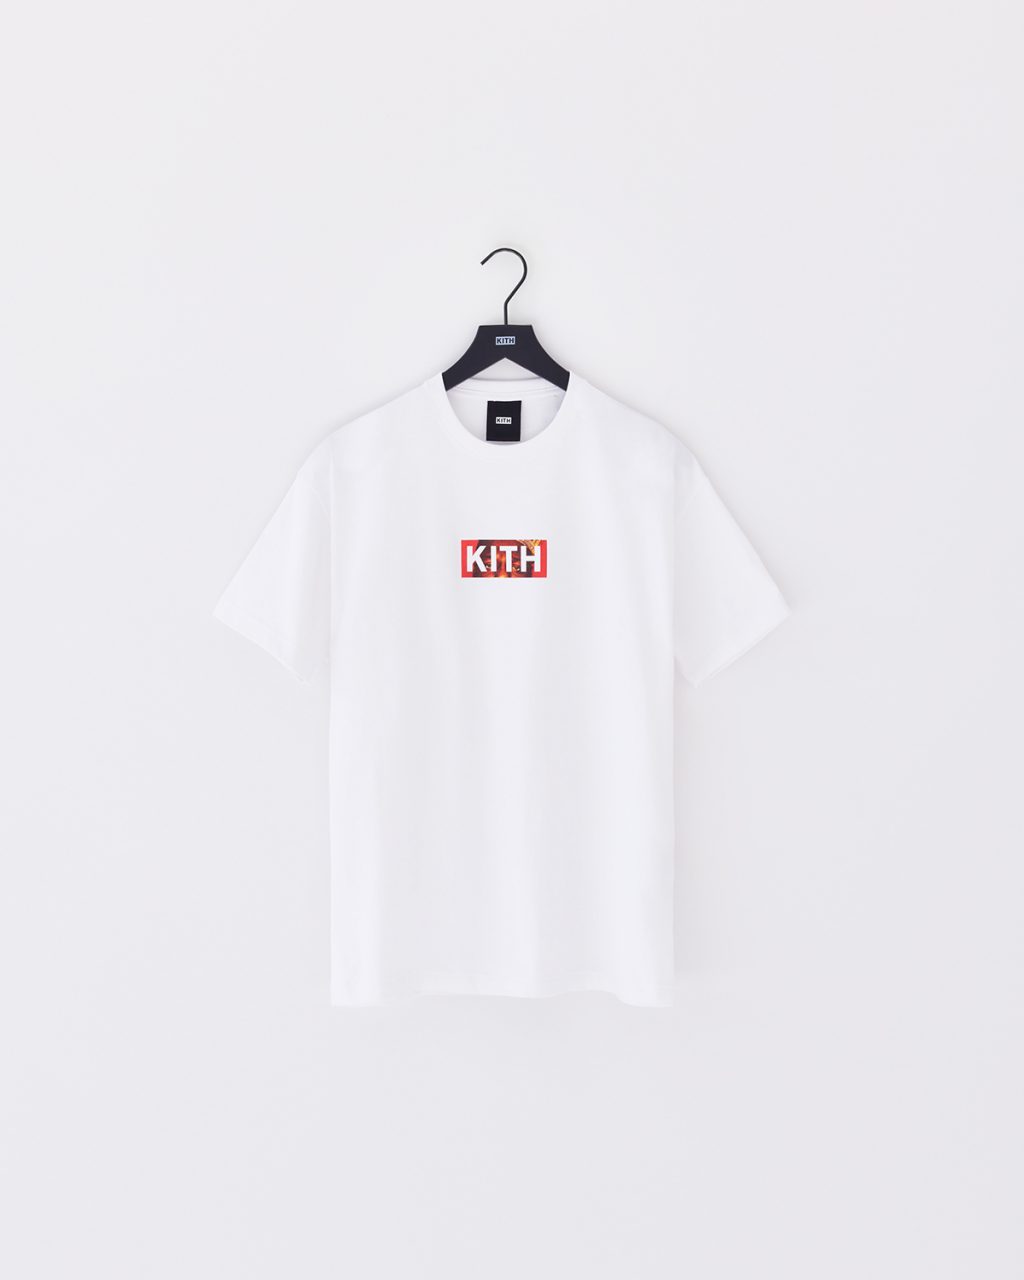 KITH for The Notorious B.I.G.が3月12日にドロップ